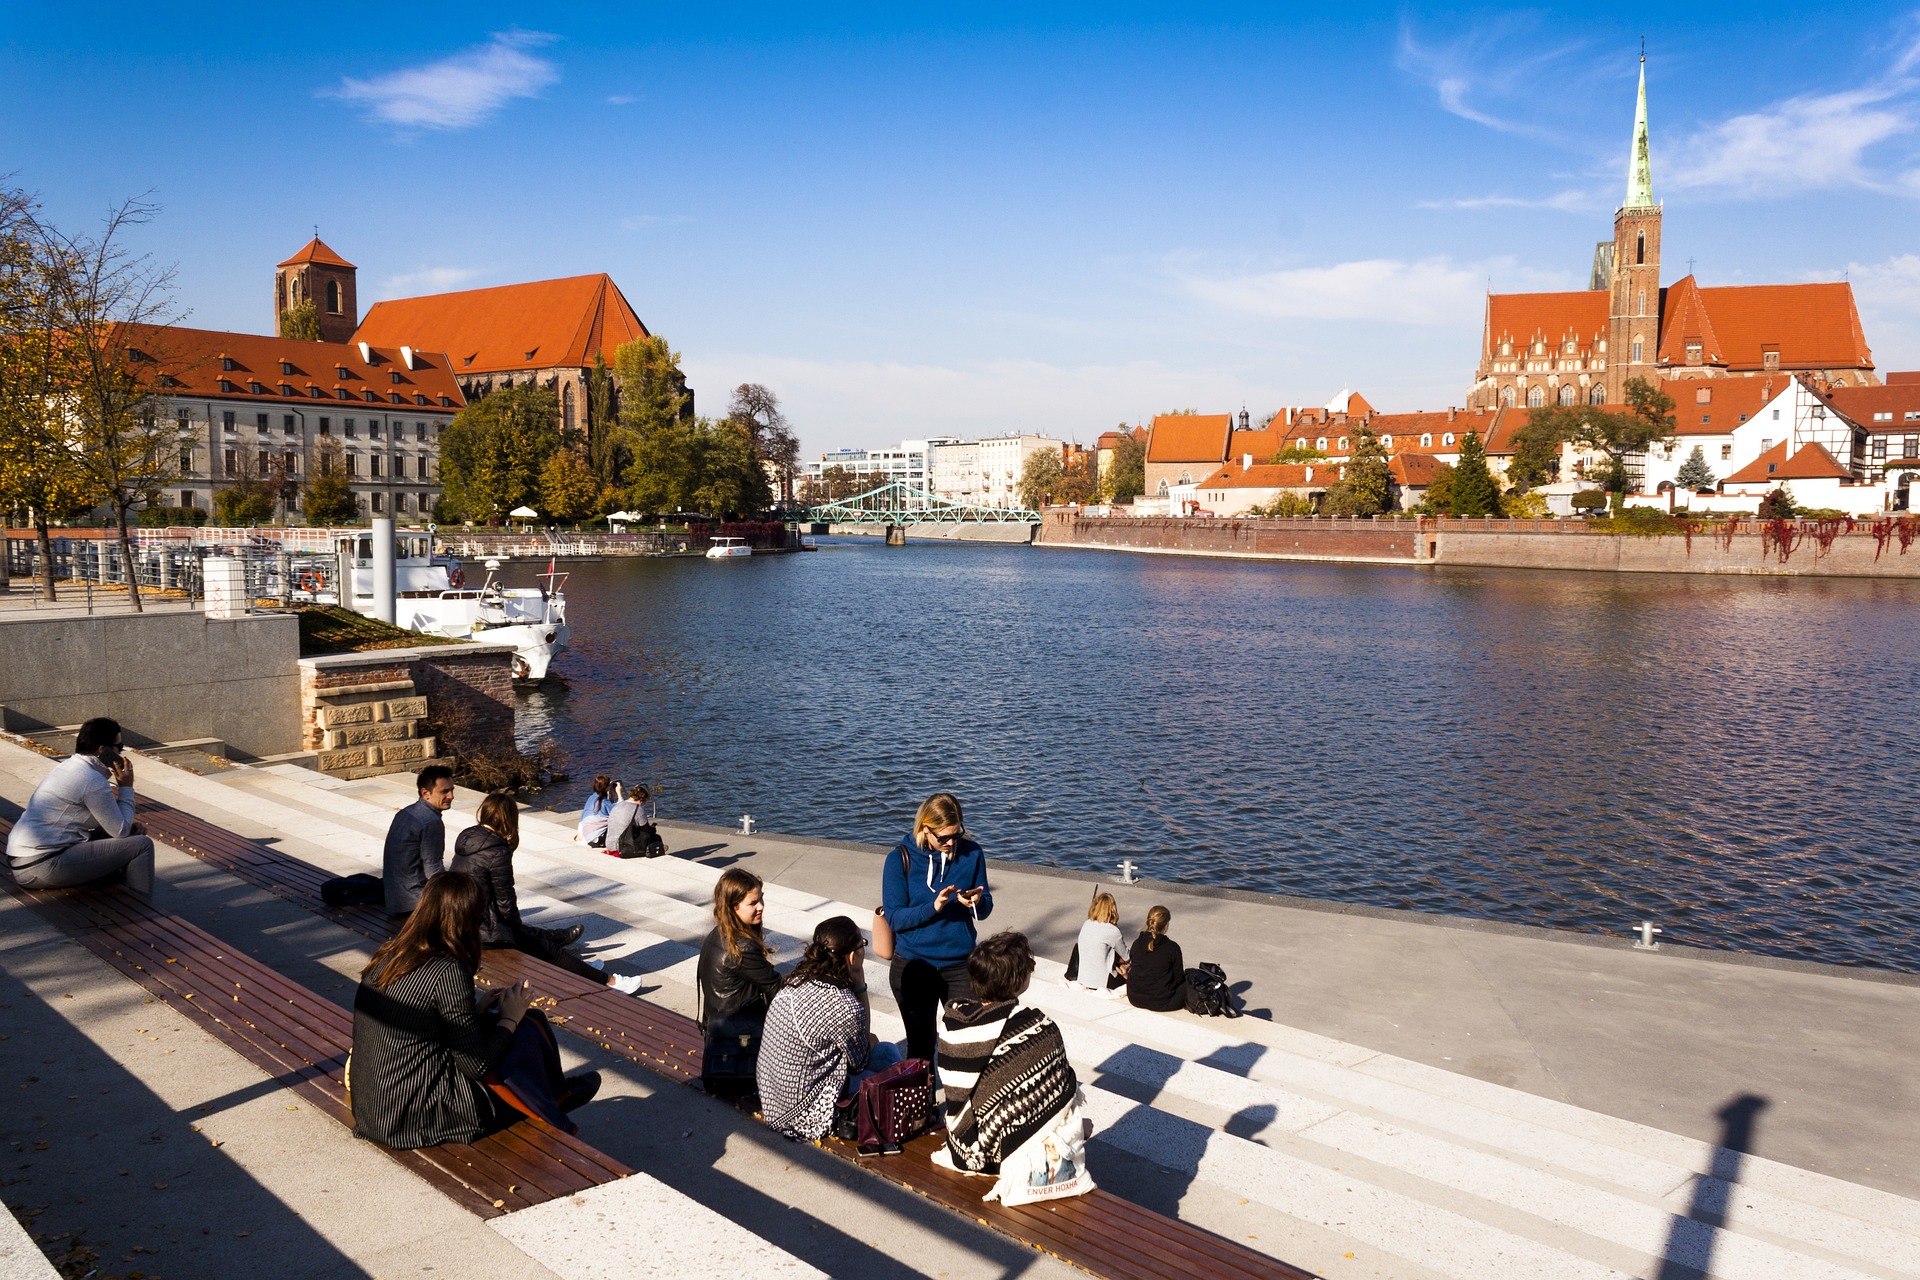 Wrocław Boat Tour: Explore the City’s Charm from the Oder River